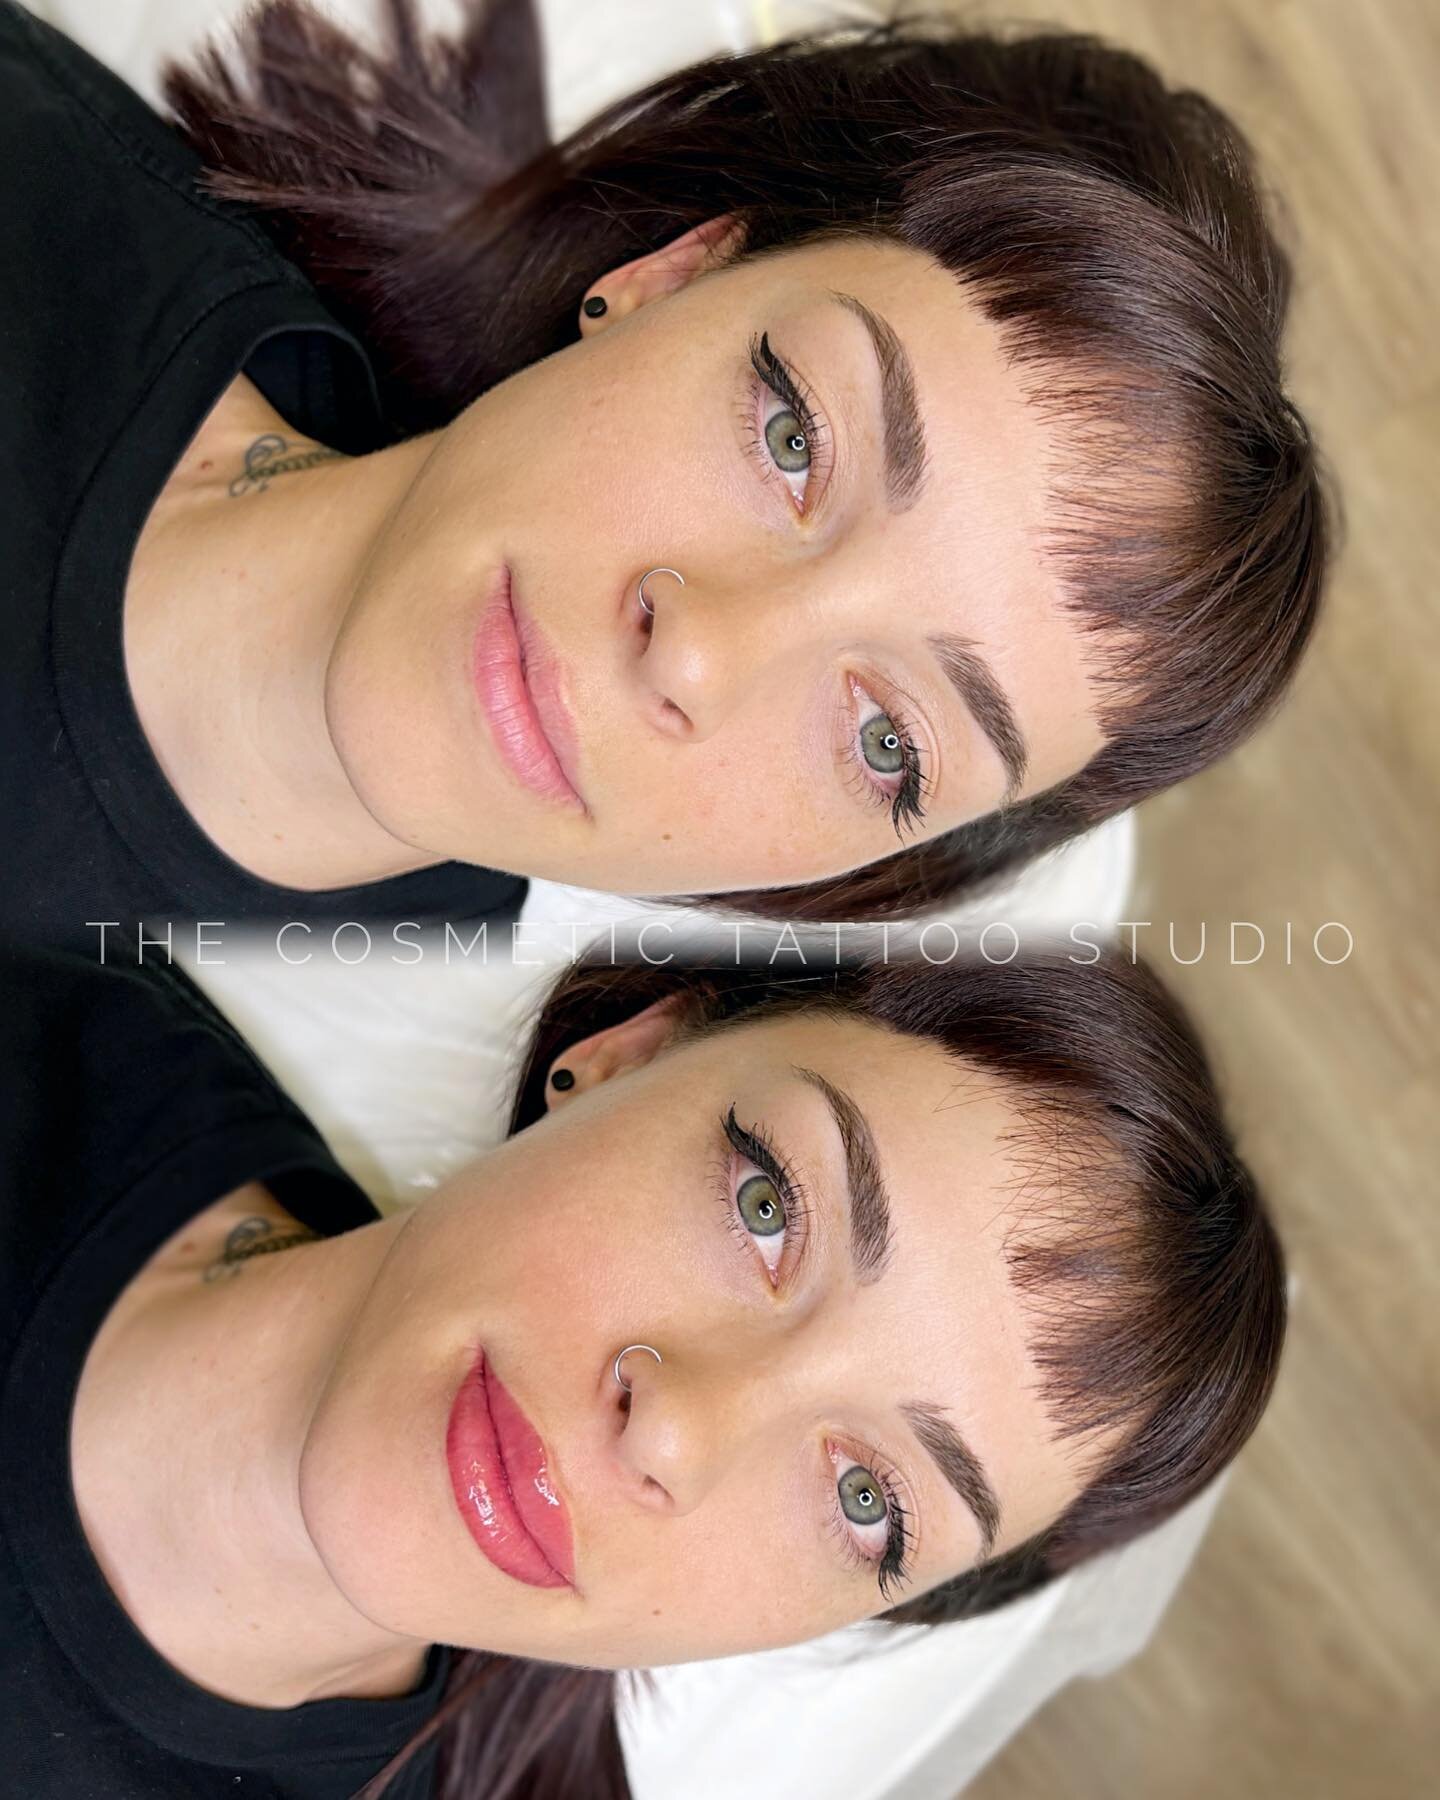 Before/after beautiful lip blush tattoo by Amber! 💕✨

This colour will heal to a soft pink while enhancing the clients natural lip shape and adding some extra definition 😍

DID YOU KNOW? 
- Lip tattooing heals within 5 days
- Colours are custom mad